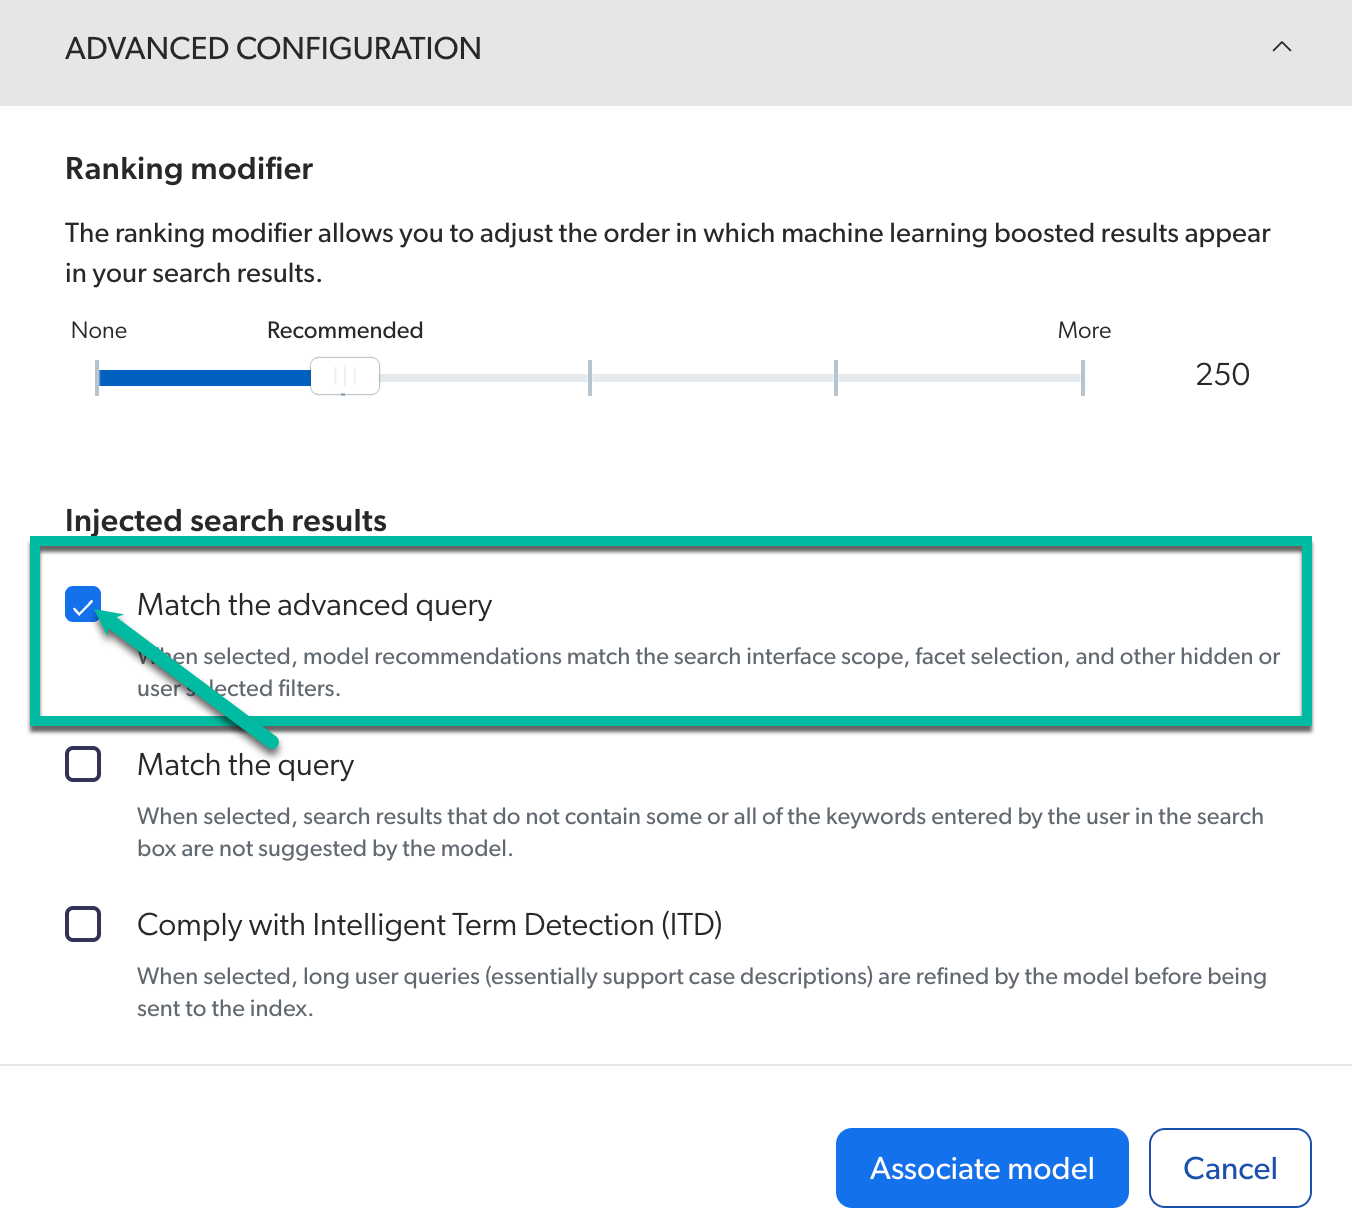 enable Match the advanced query option